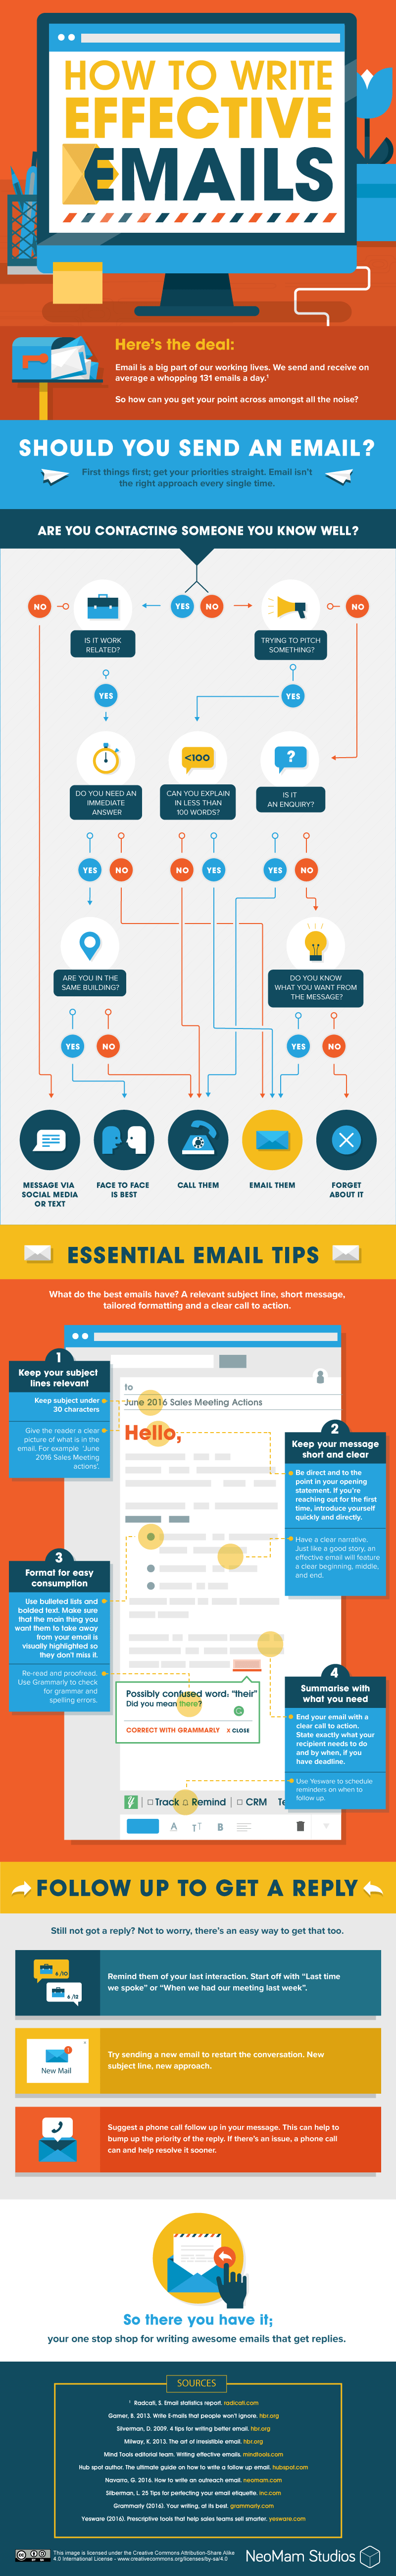 how-to-write-effective-emails-dv3-1